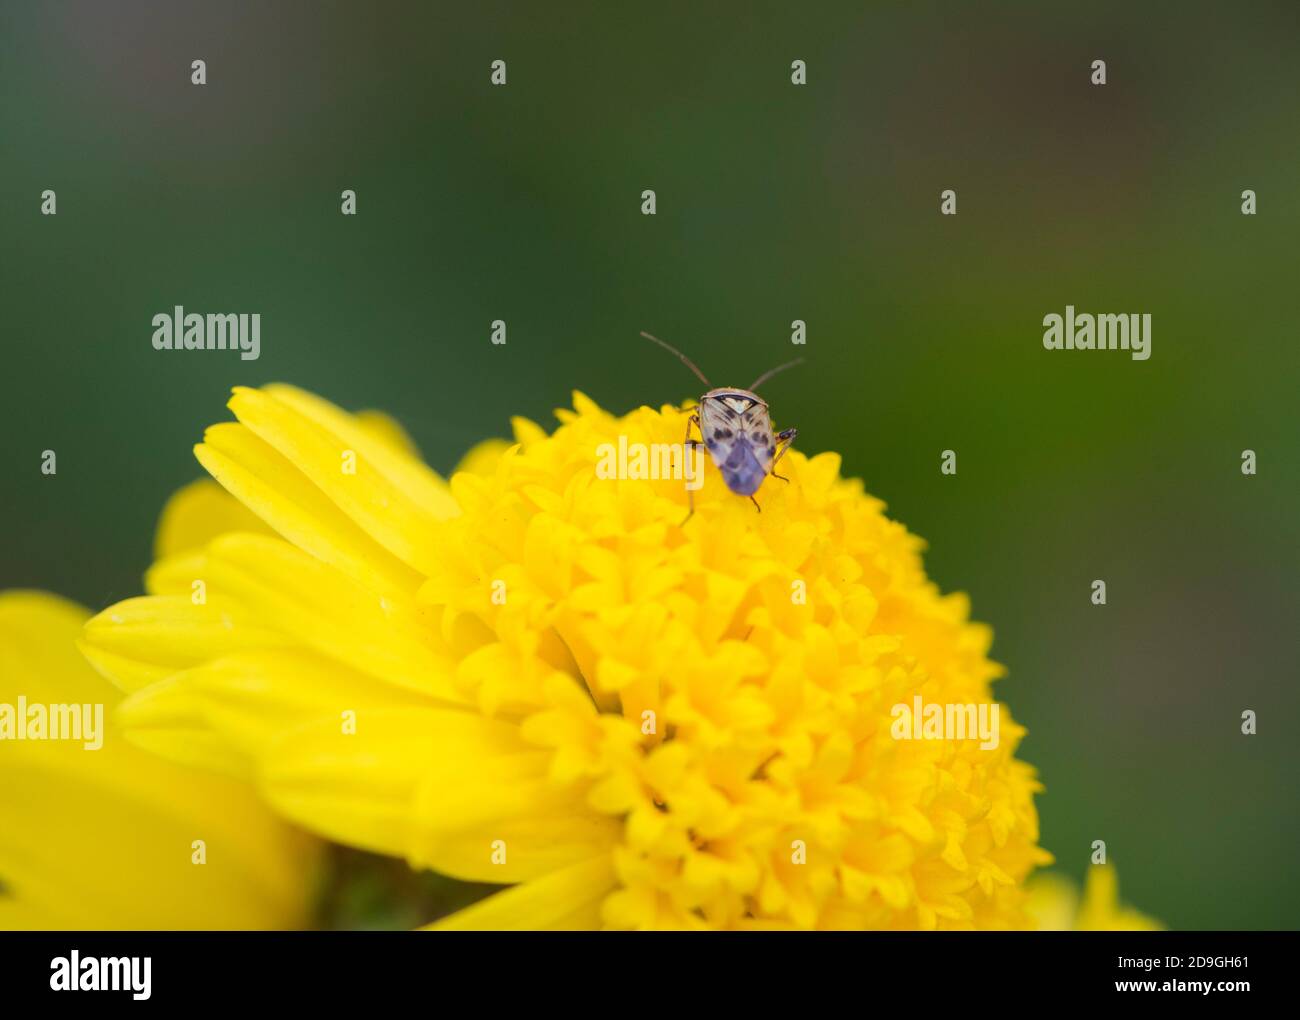 A bug on a yellow flower Stock Photo